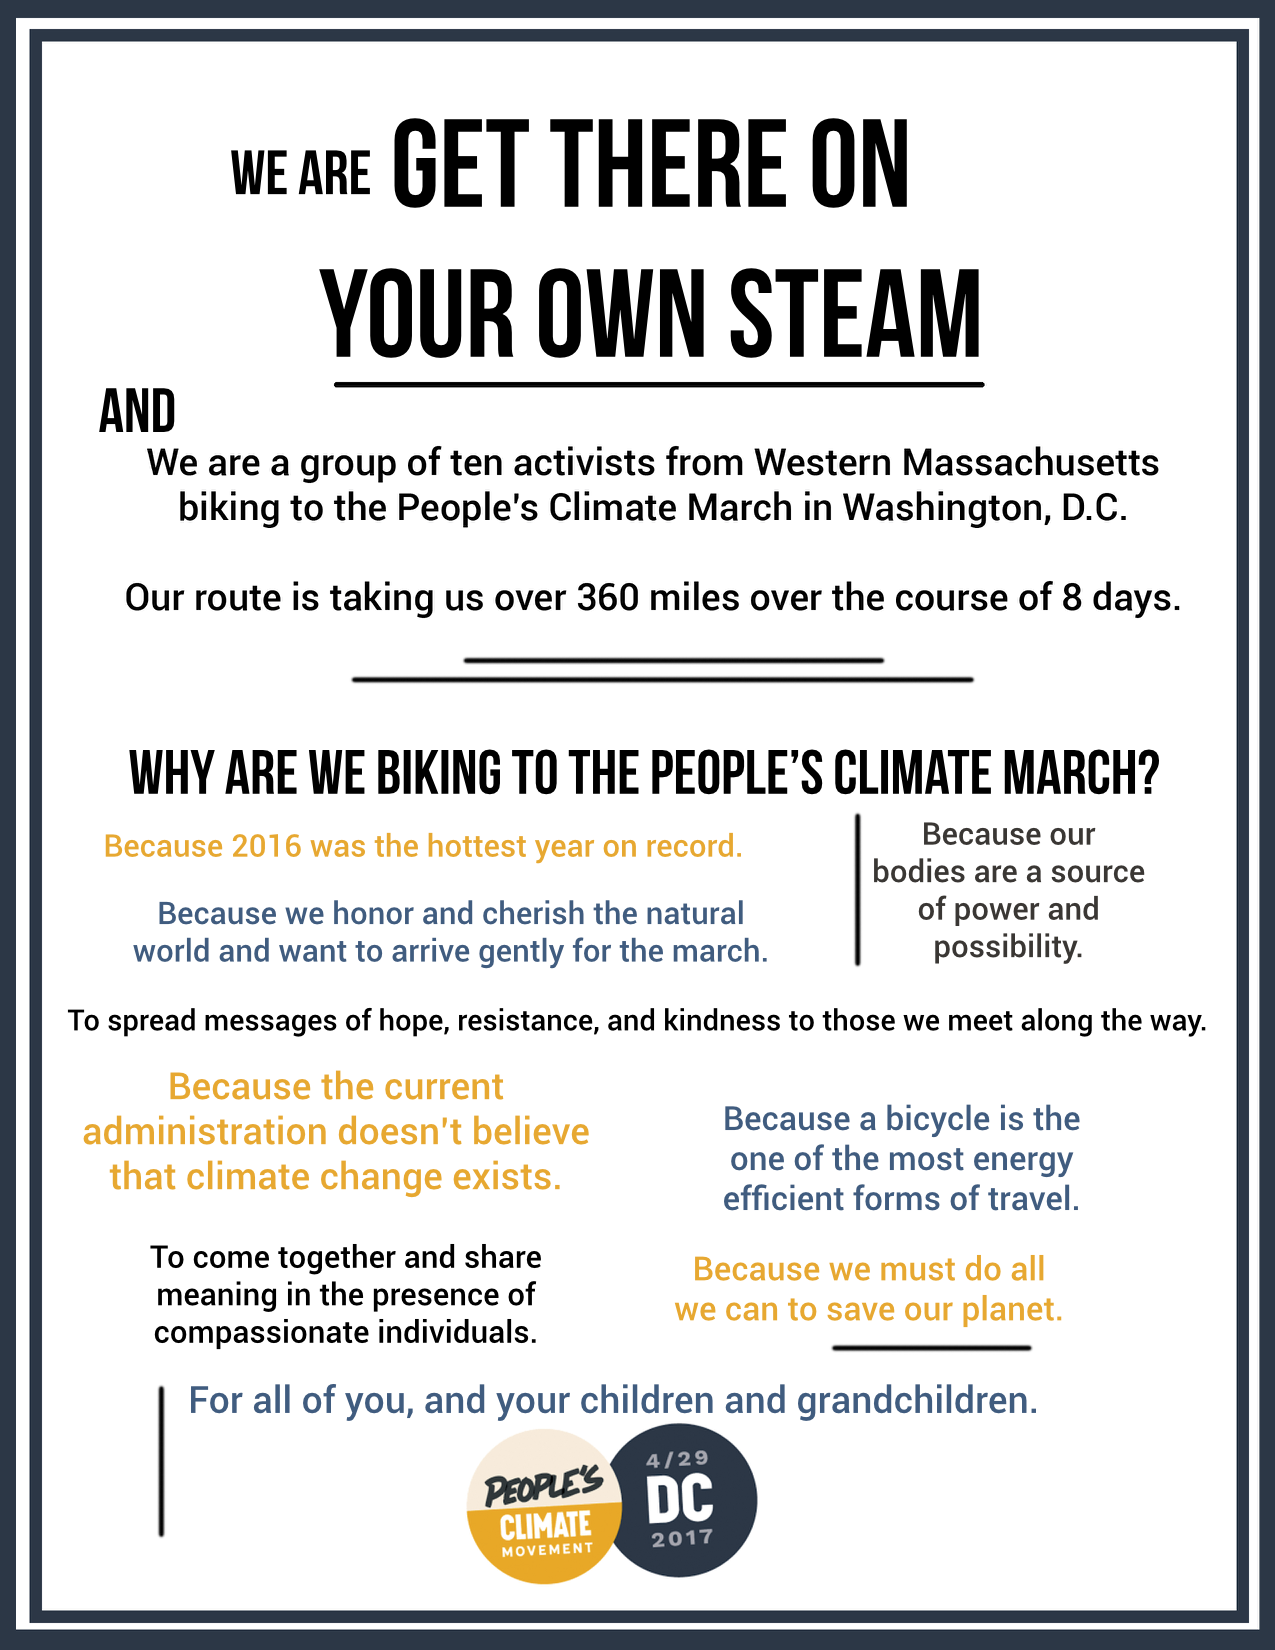 A description of the purpose of the bike ride from MA to DC for the People's Climate March